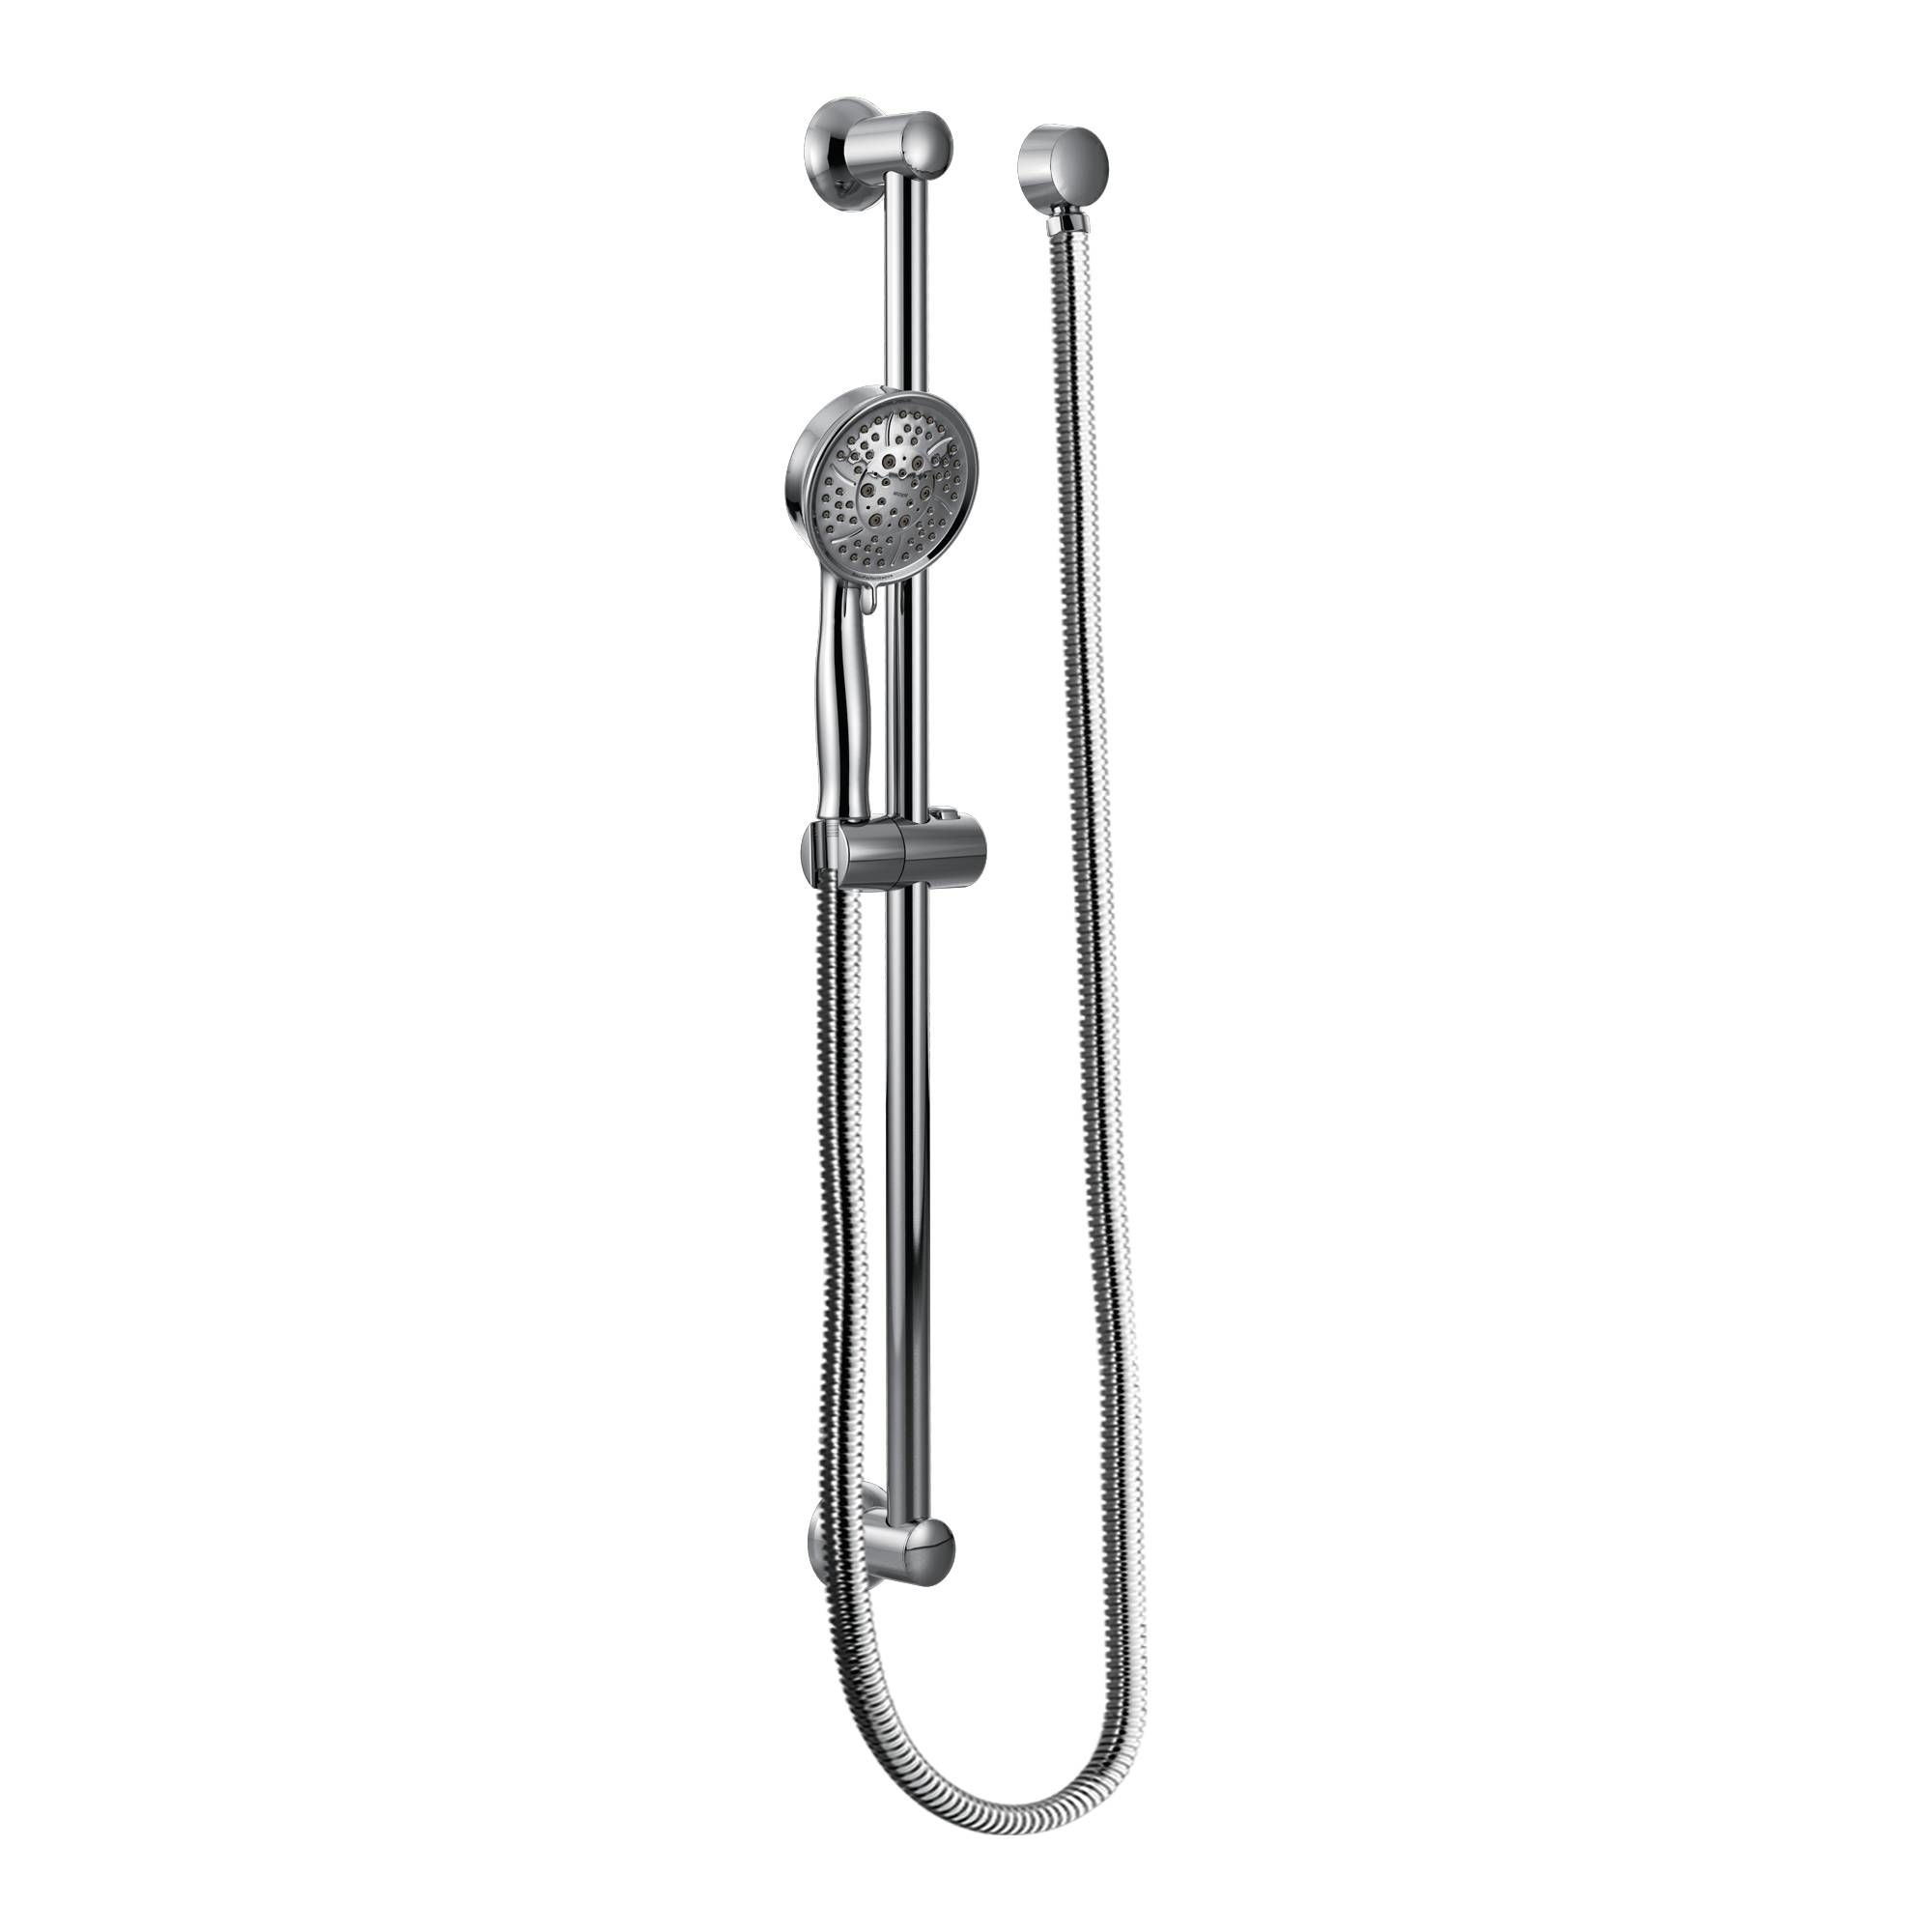 Moen 603sep Chrome Pressure Balanced Shower System With 2 Gpm